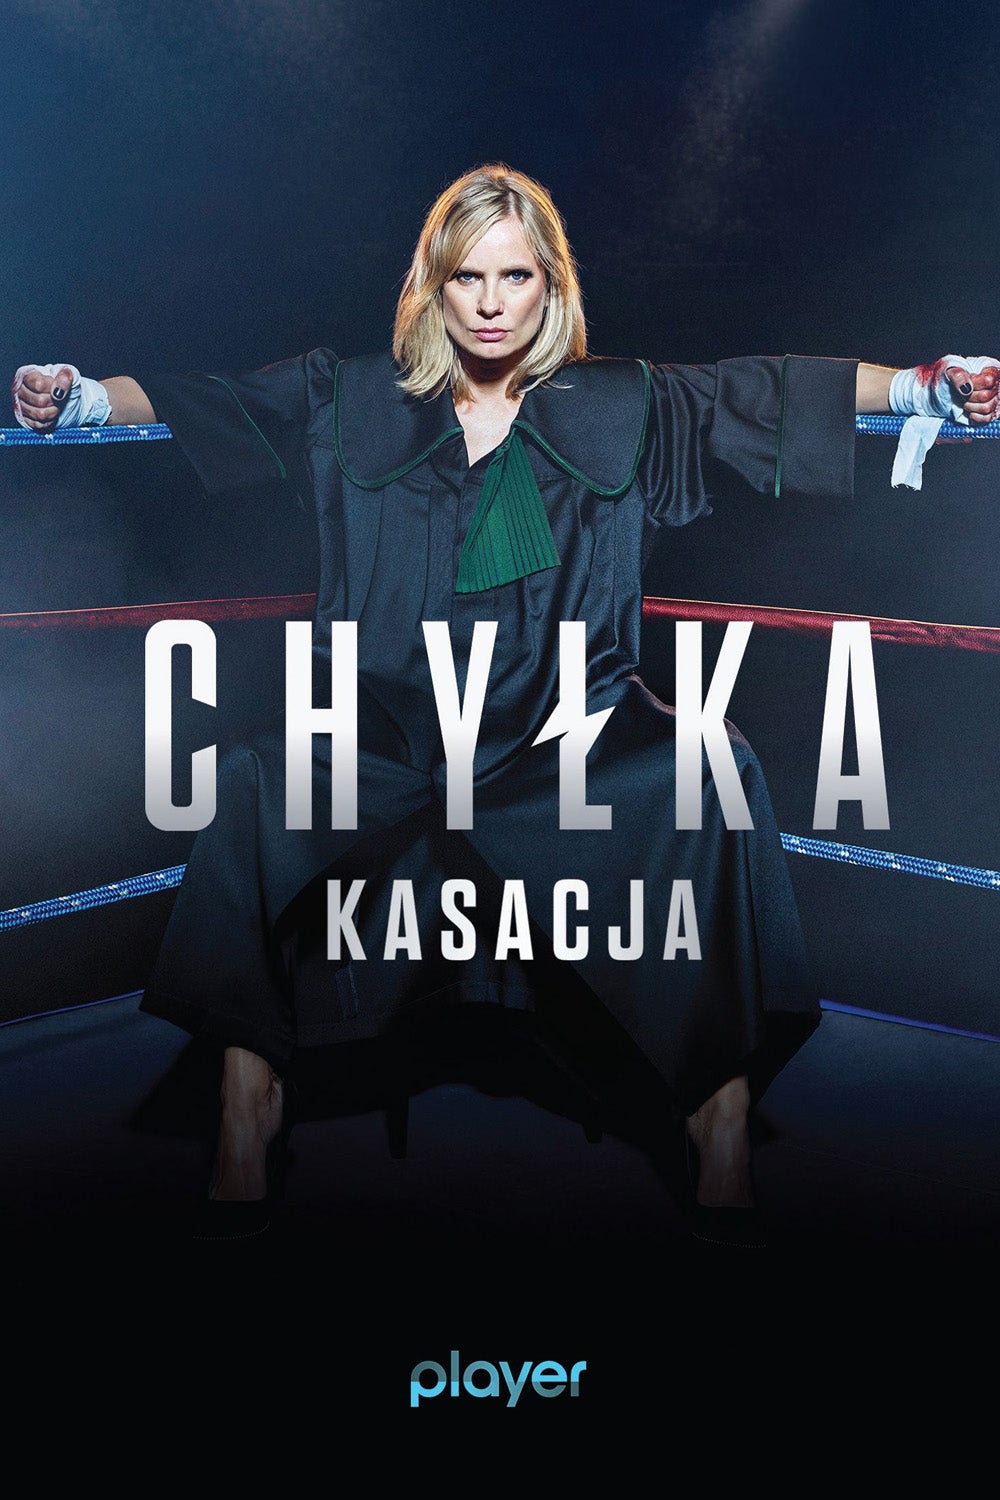 TV ratings for The Disappearance (Chylka) in Germany. Player.pl TV series